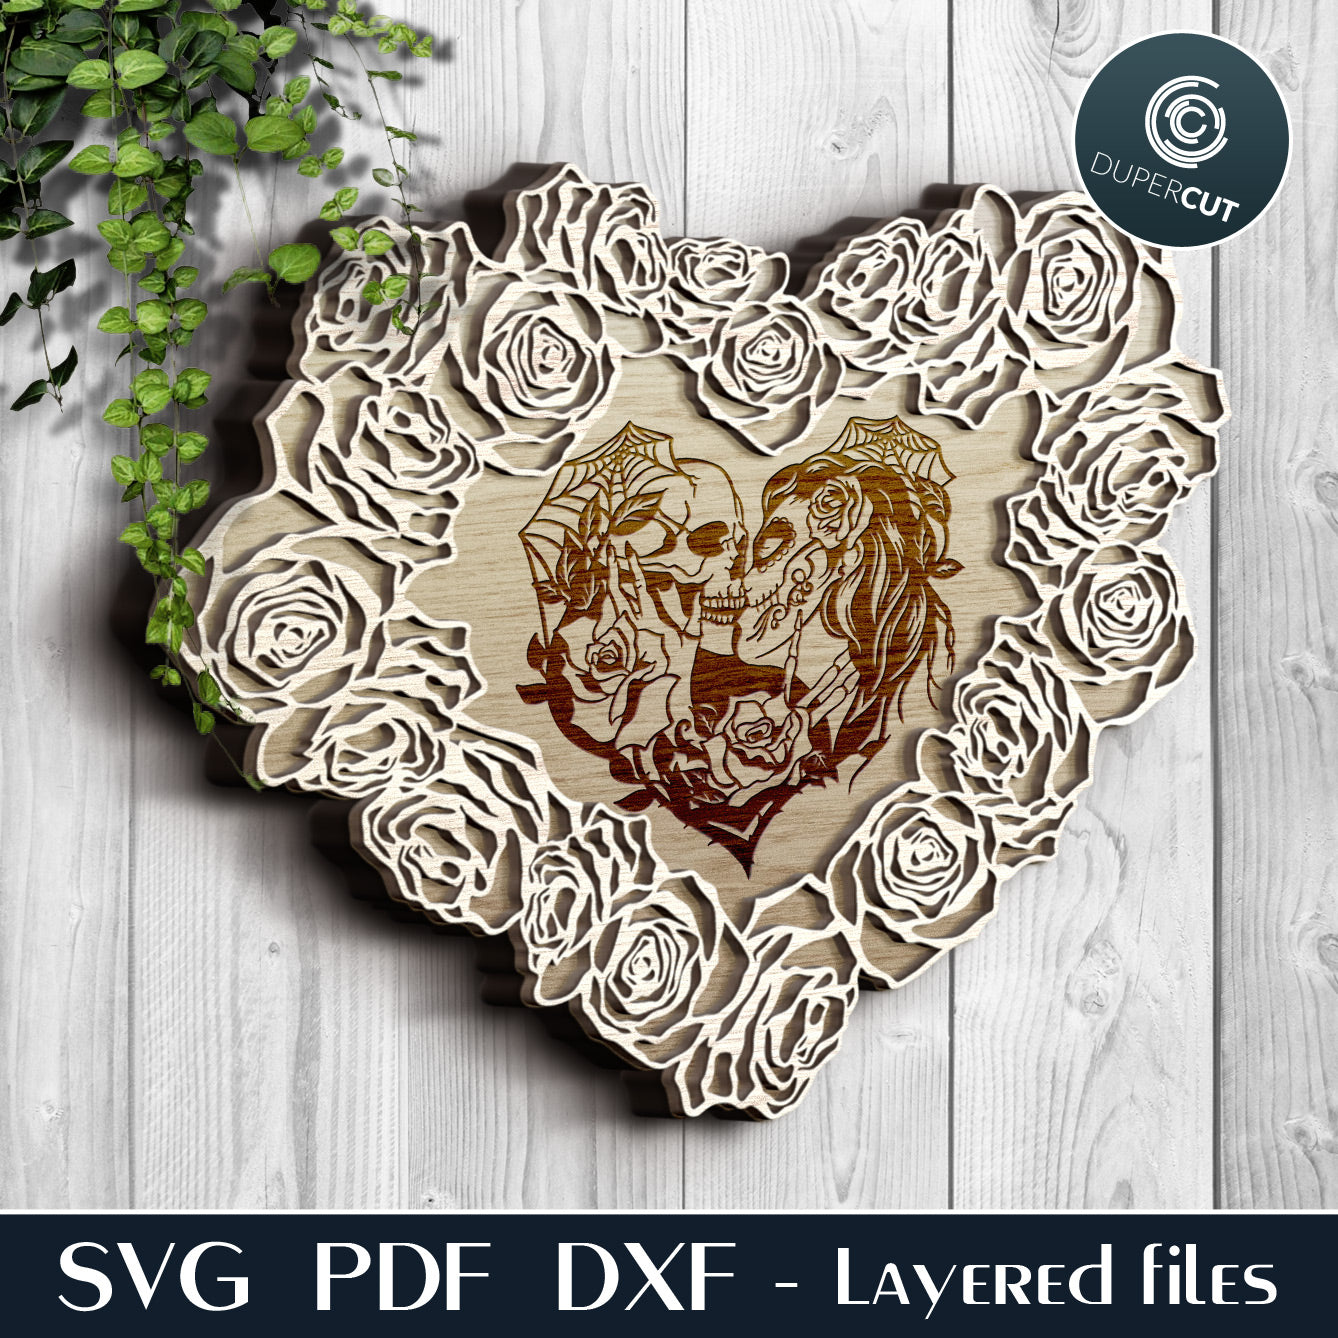 Heart shaped floral wreath layered files - SVG PDF DXF template for laser cutting and engraving, Glowforge, Cricut, Silhouette Cameo, CNC plasma machines